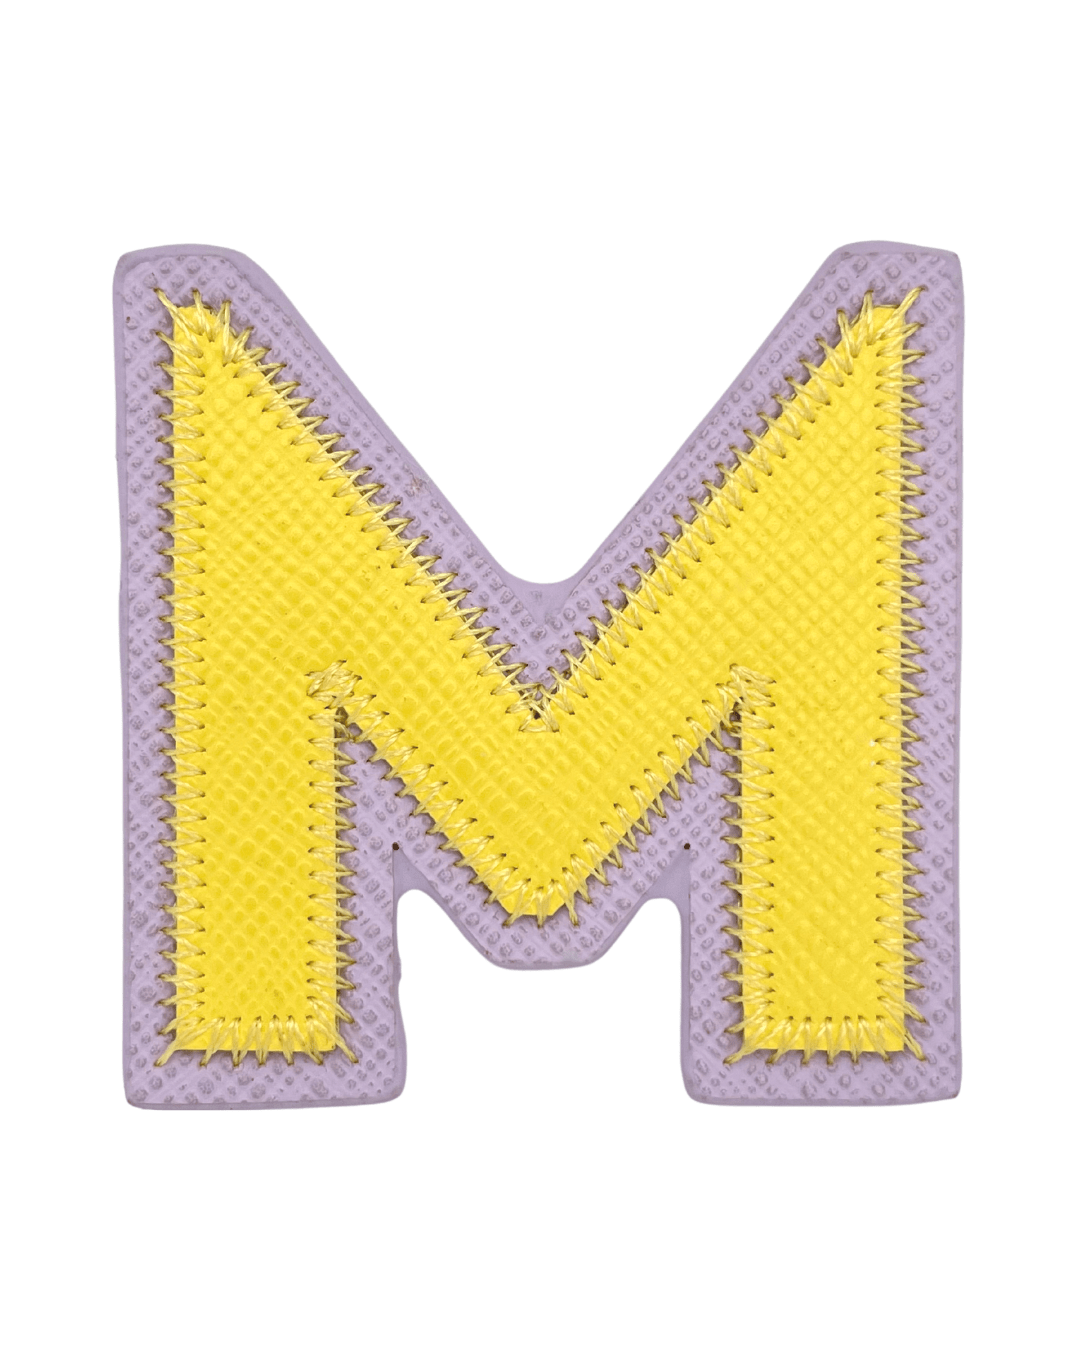 Yellow + Purple Vegan Leather Letter Patches - American Deadstock